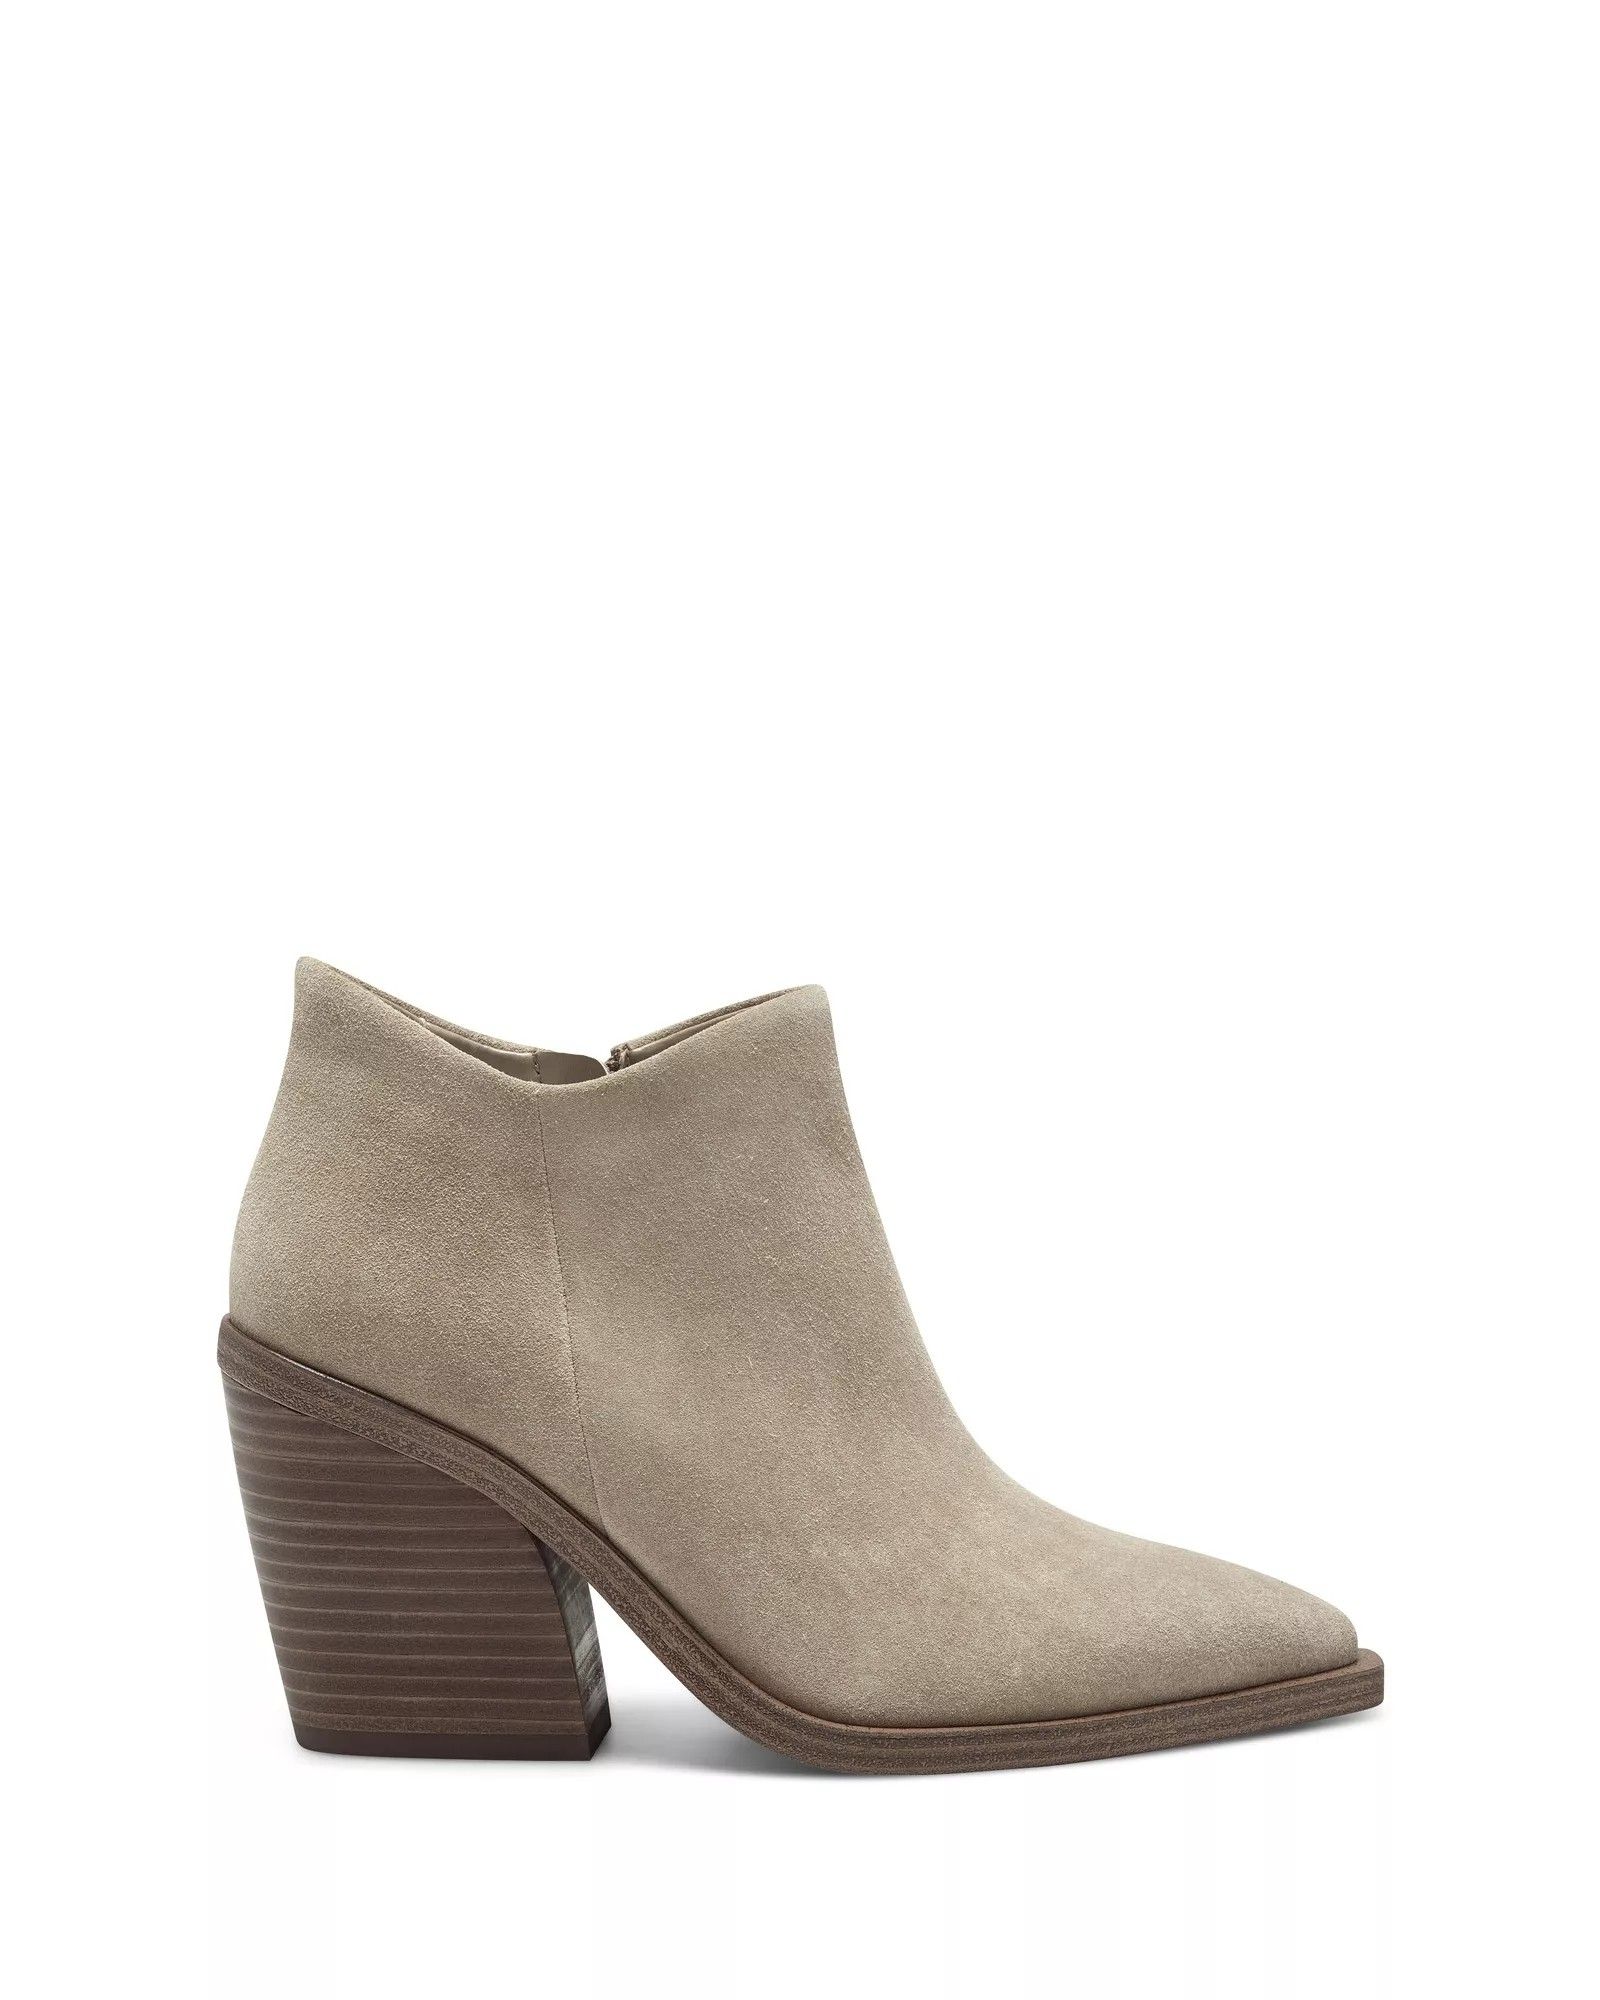 Golivia Western Boot | Vince Camuto